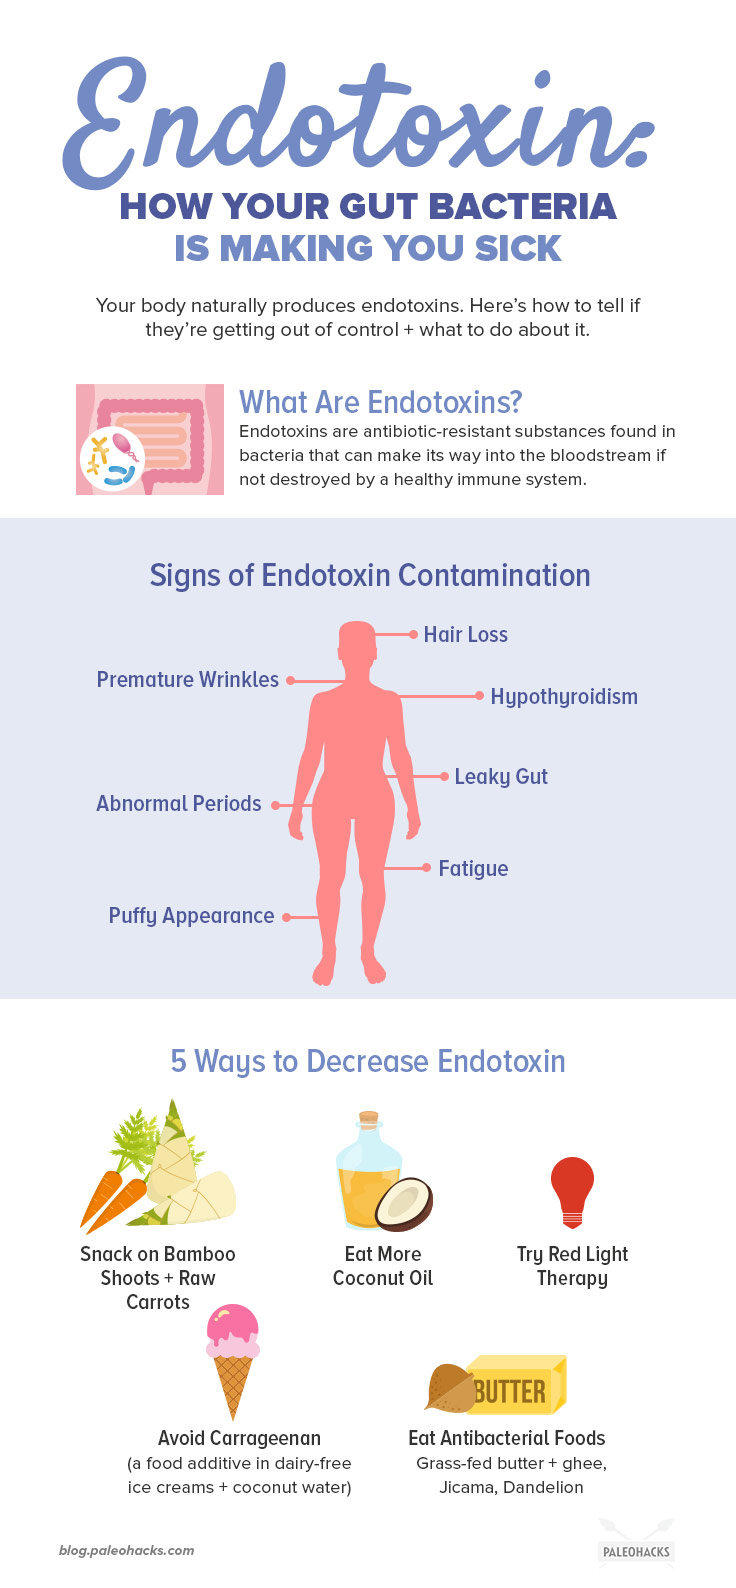 Your body naturally produces endotoxins. Here’s how to tell if these antibiotic-resistant substances in your gut are getting out of control - and what to do about it.